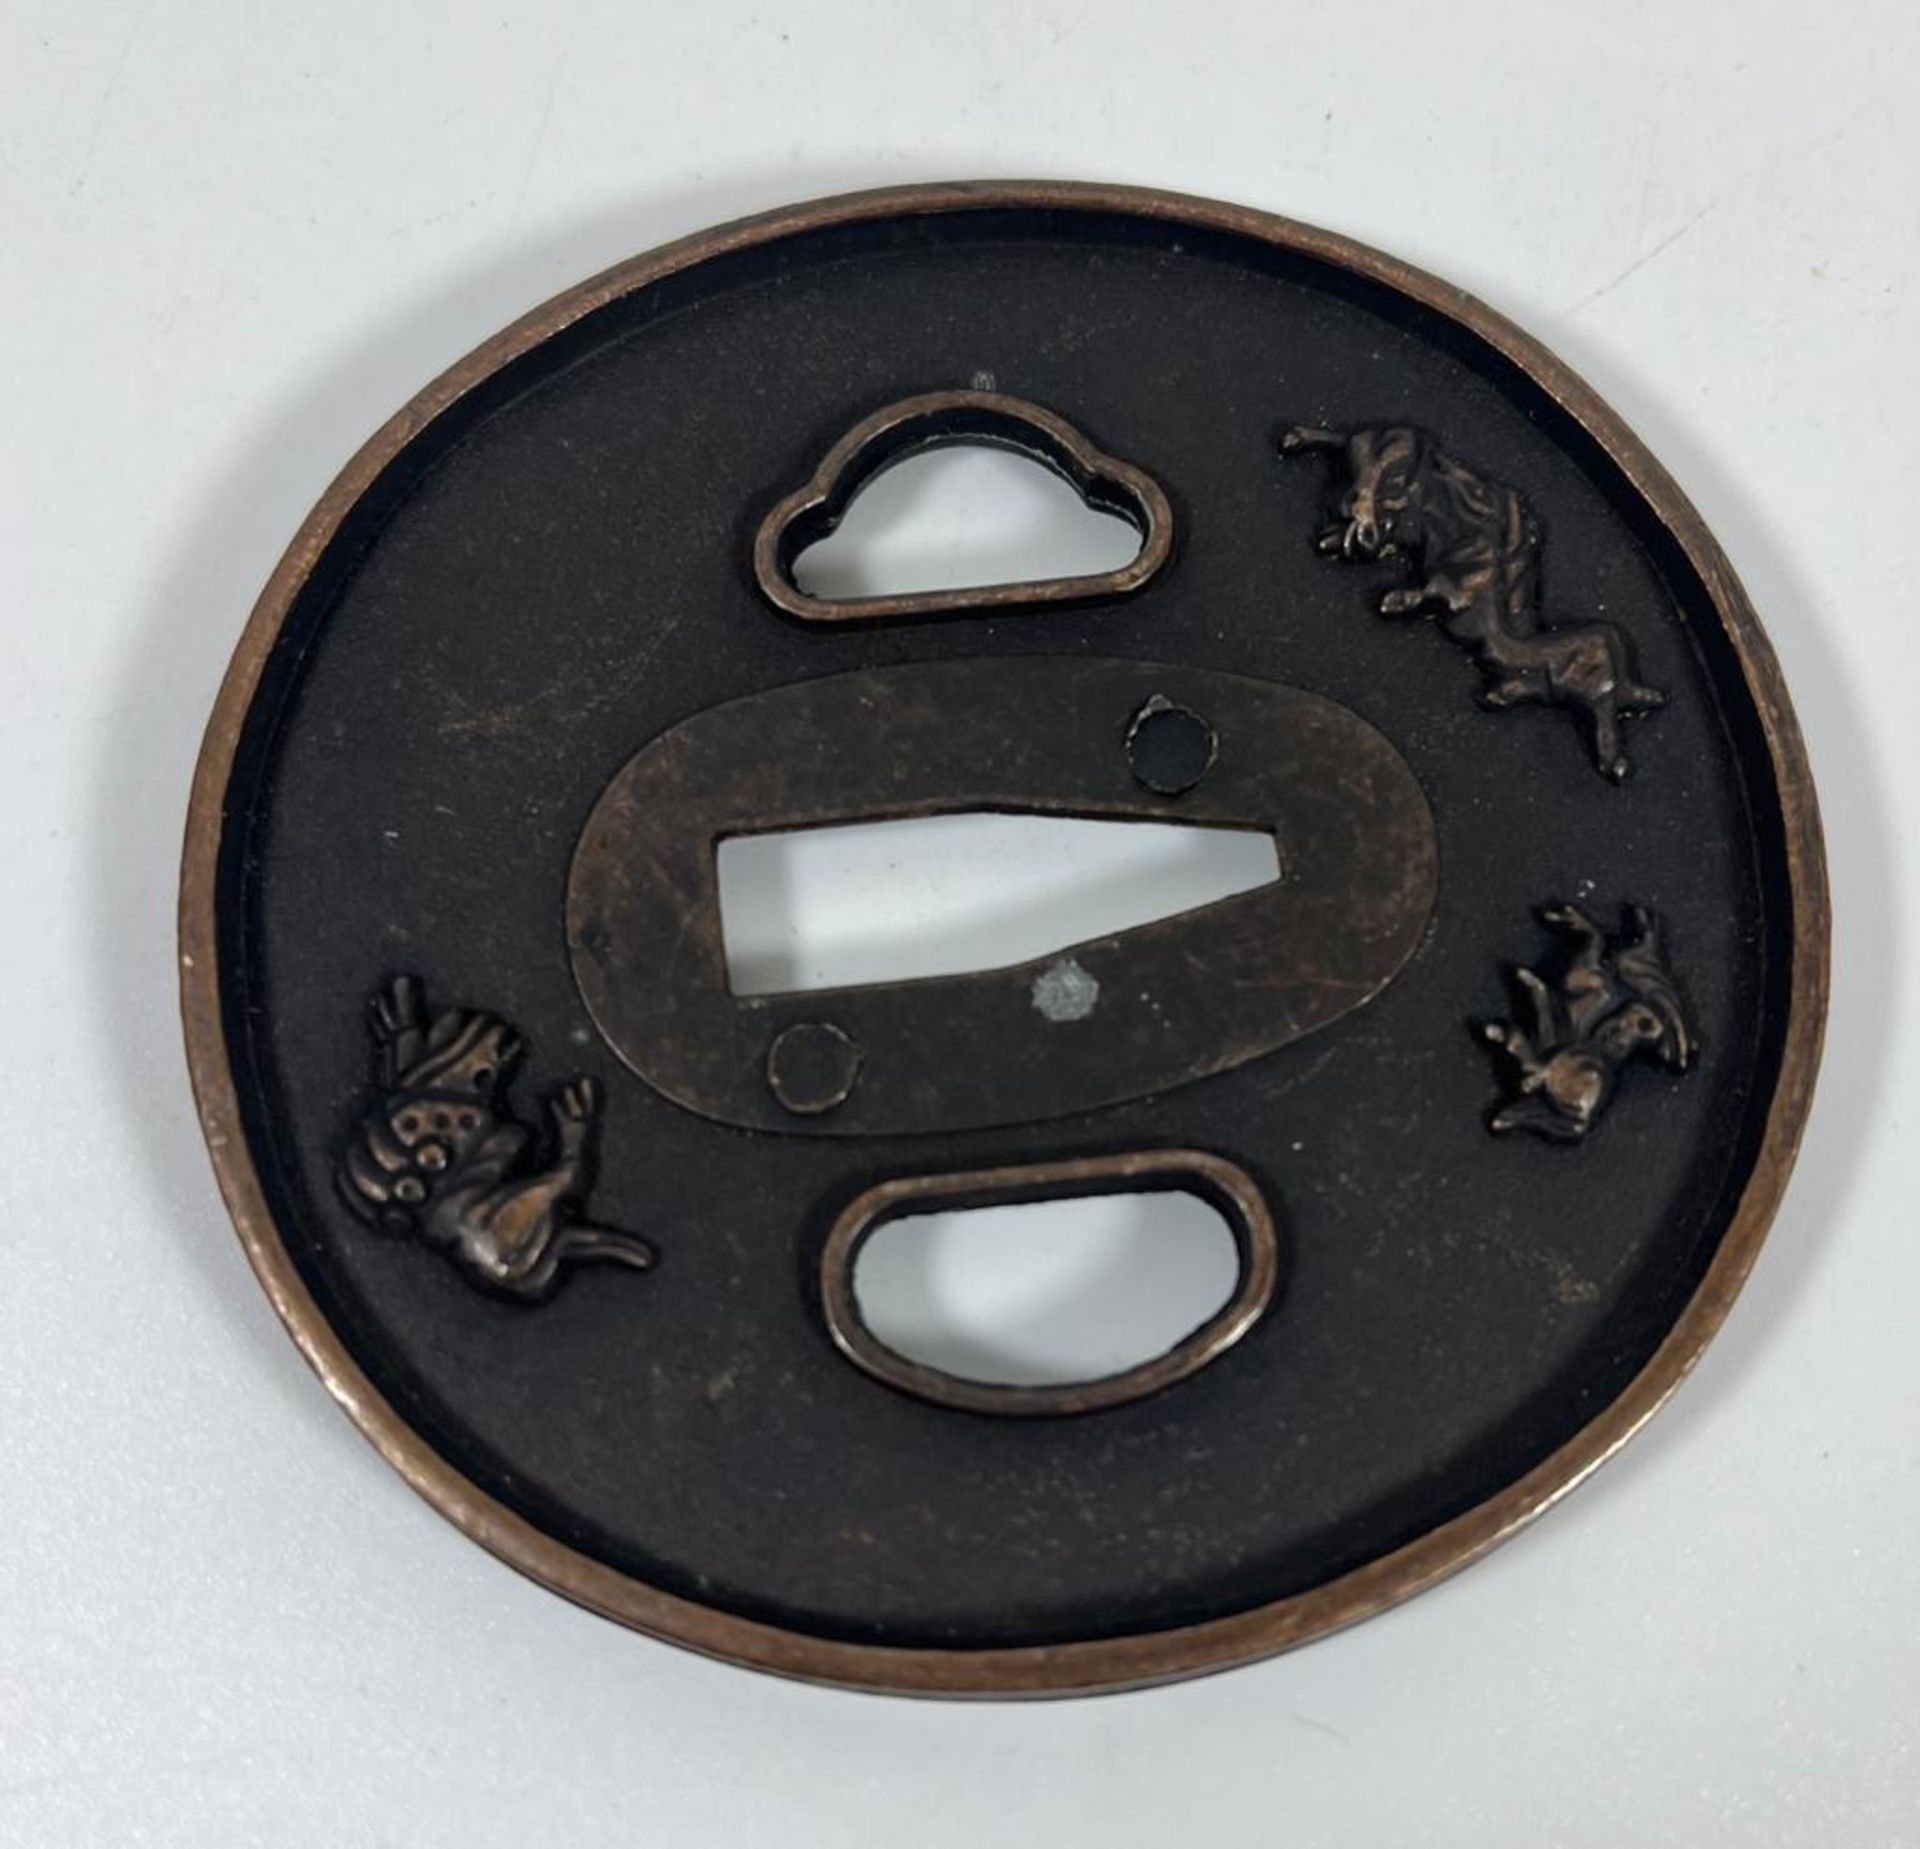 A JAPANESE BRONZE TSUBA WITH MYTHICAL BEAST DESIGN, DIAMETER 7.5 CM - Image 2 of 4